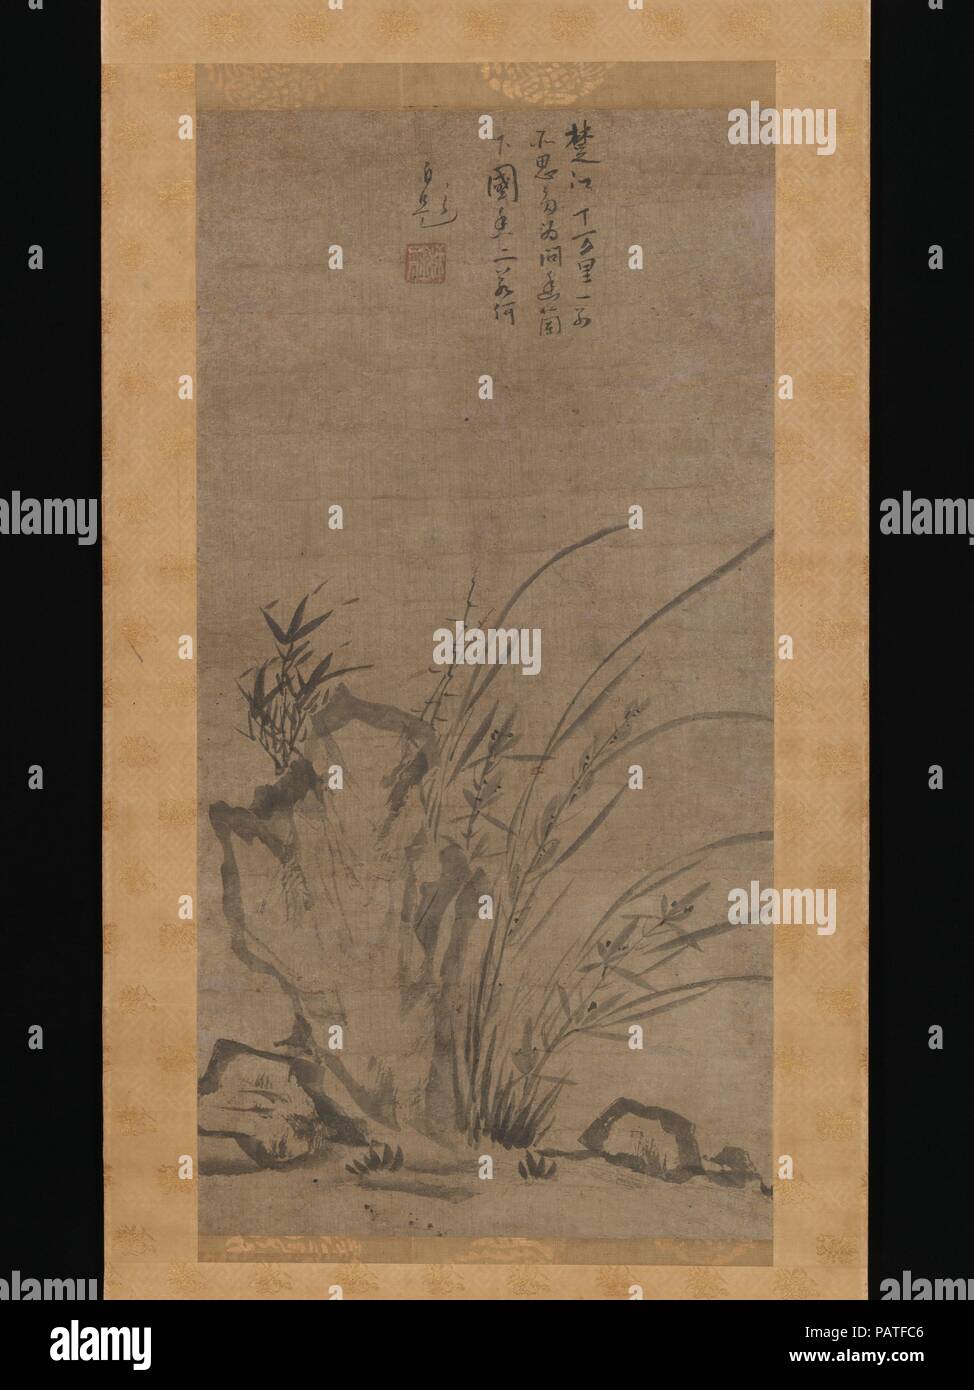 Orchids, Bamboo, Briars, and Rocks. Artist: Tesshu Tokusai (Japanese, died 1366). Culture: Japan. Dimensions: Image: 28 3/8 × 14 1/2 in. (72 × 36.8 cm)  Overall with mounting: 60 1/16 × 19 5/16 in. (152.5 × 49 cm)  Overall with knobs: 60 1/16 × 21 in. (152.5 × 53.4 cm). Date: mid-14th century.  In medieval Japan, ink paintings that combined orchids with briars, bamboo, and rocks were most commonly associated with the Yuan-dynasty Chinese painter Xuechuang Puming (active mid-14th century), whom Tesshu Tokusai--a Zen monk and accomplished poet and painter-- may have encountered during an extende Stock Photo